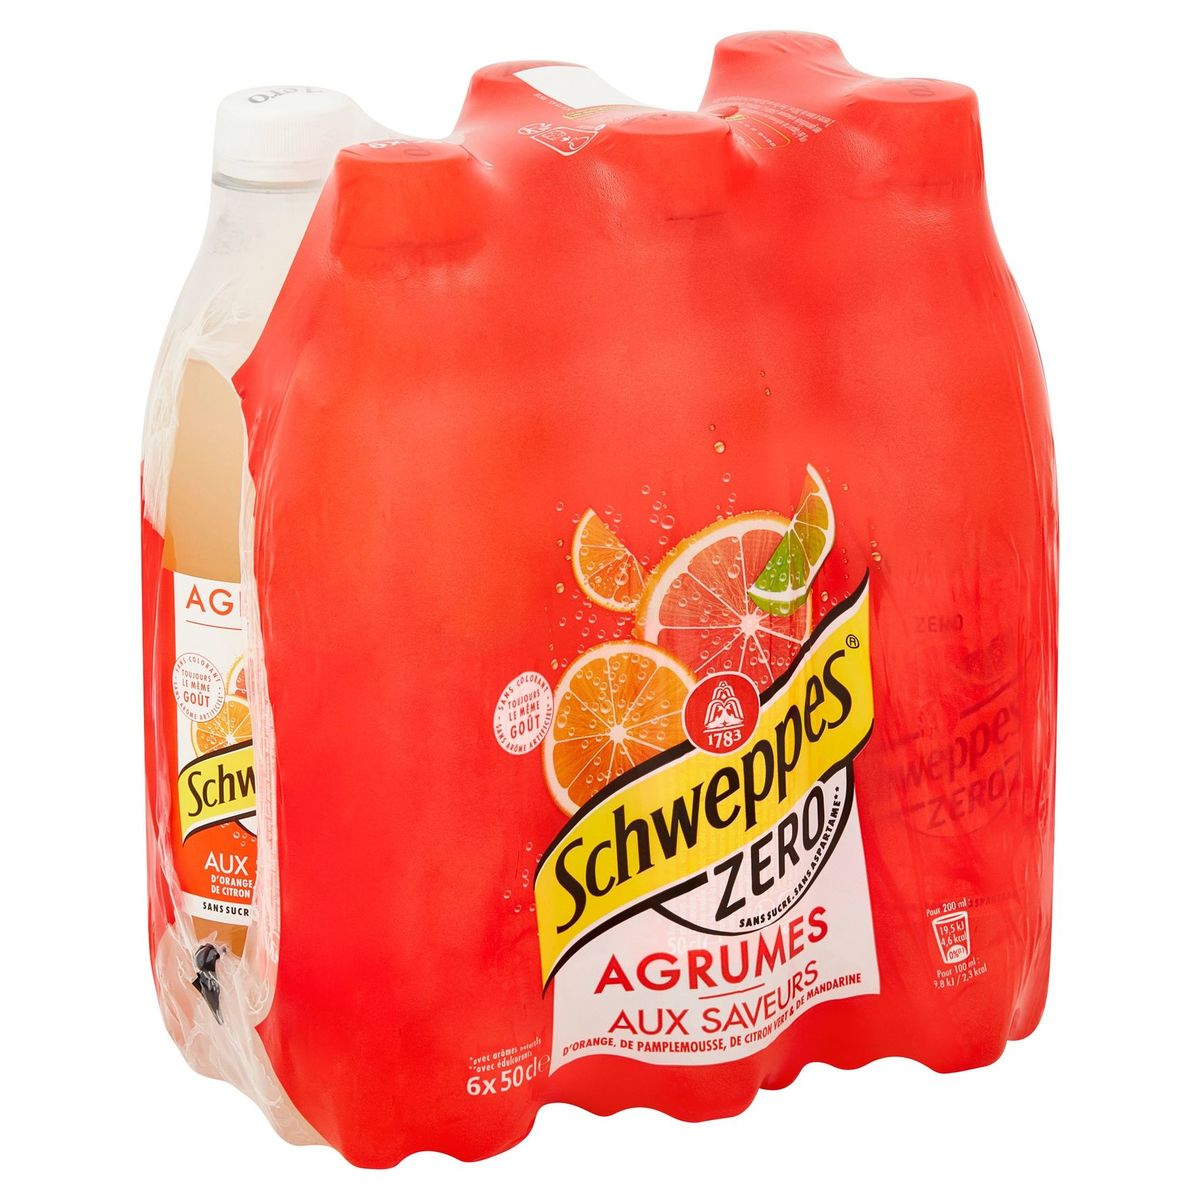 Schweppes Agrumes 6 x 50 cl